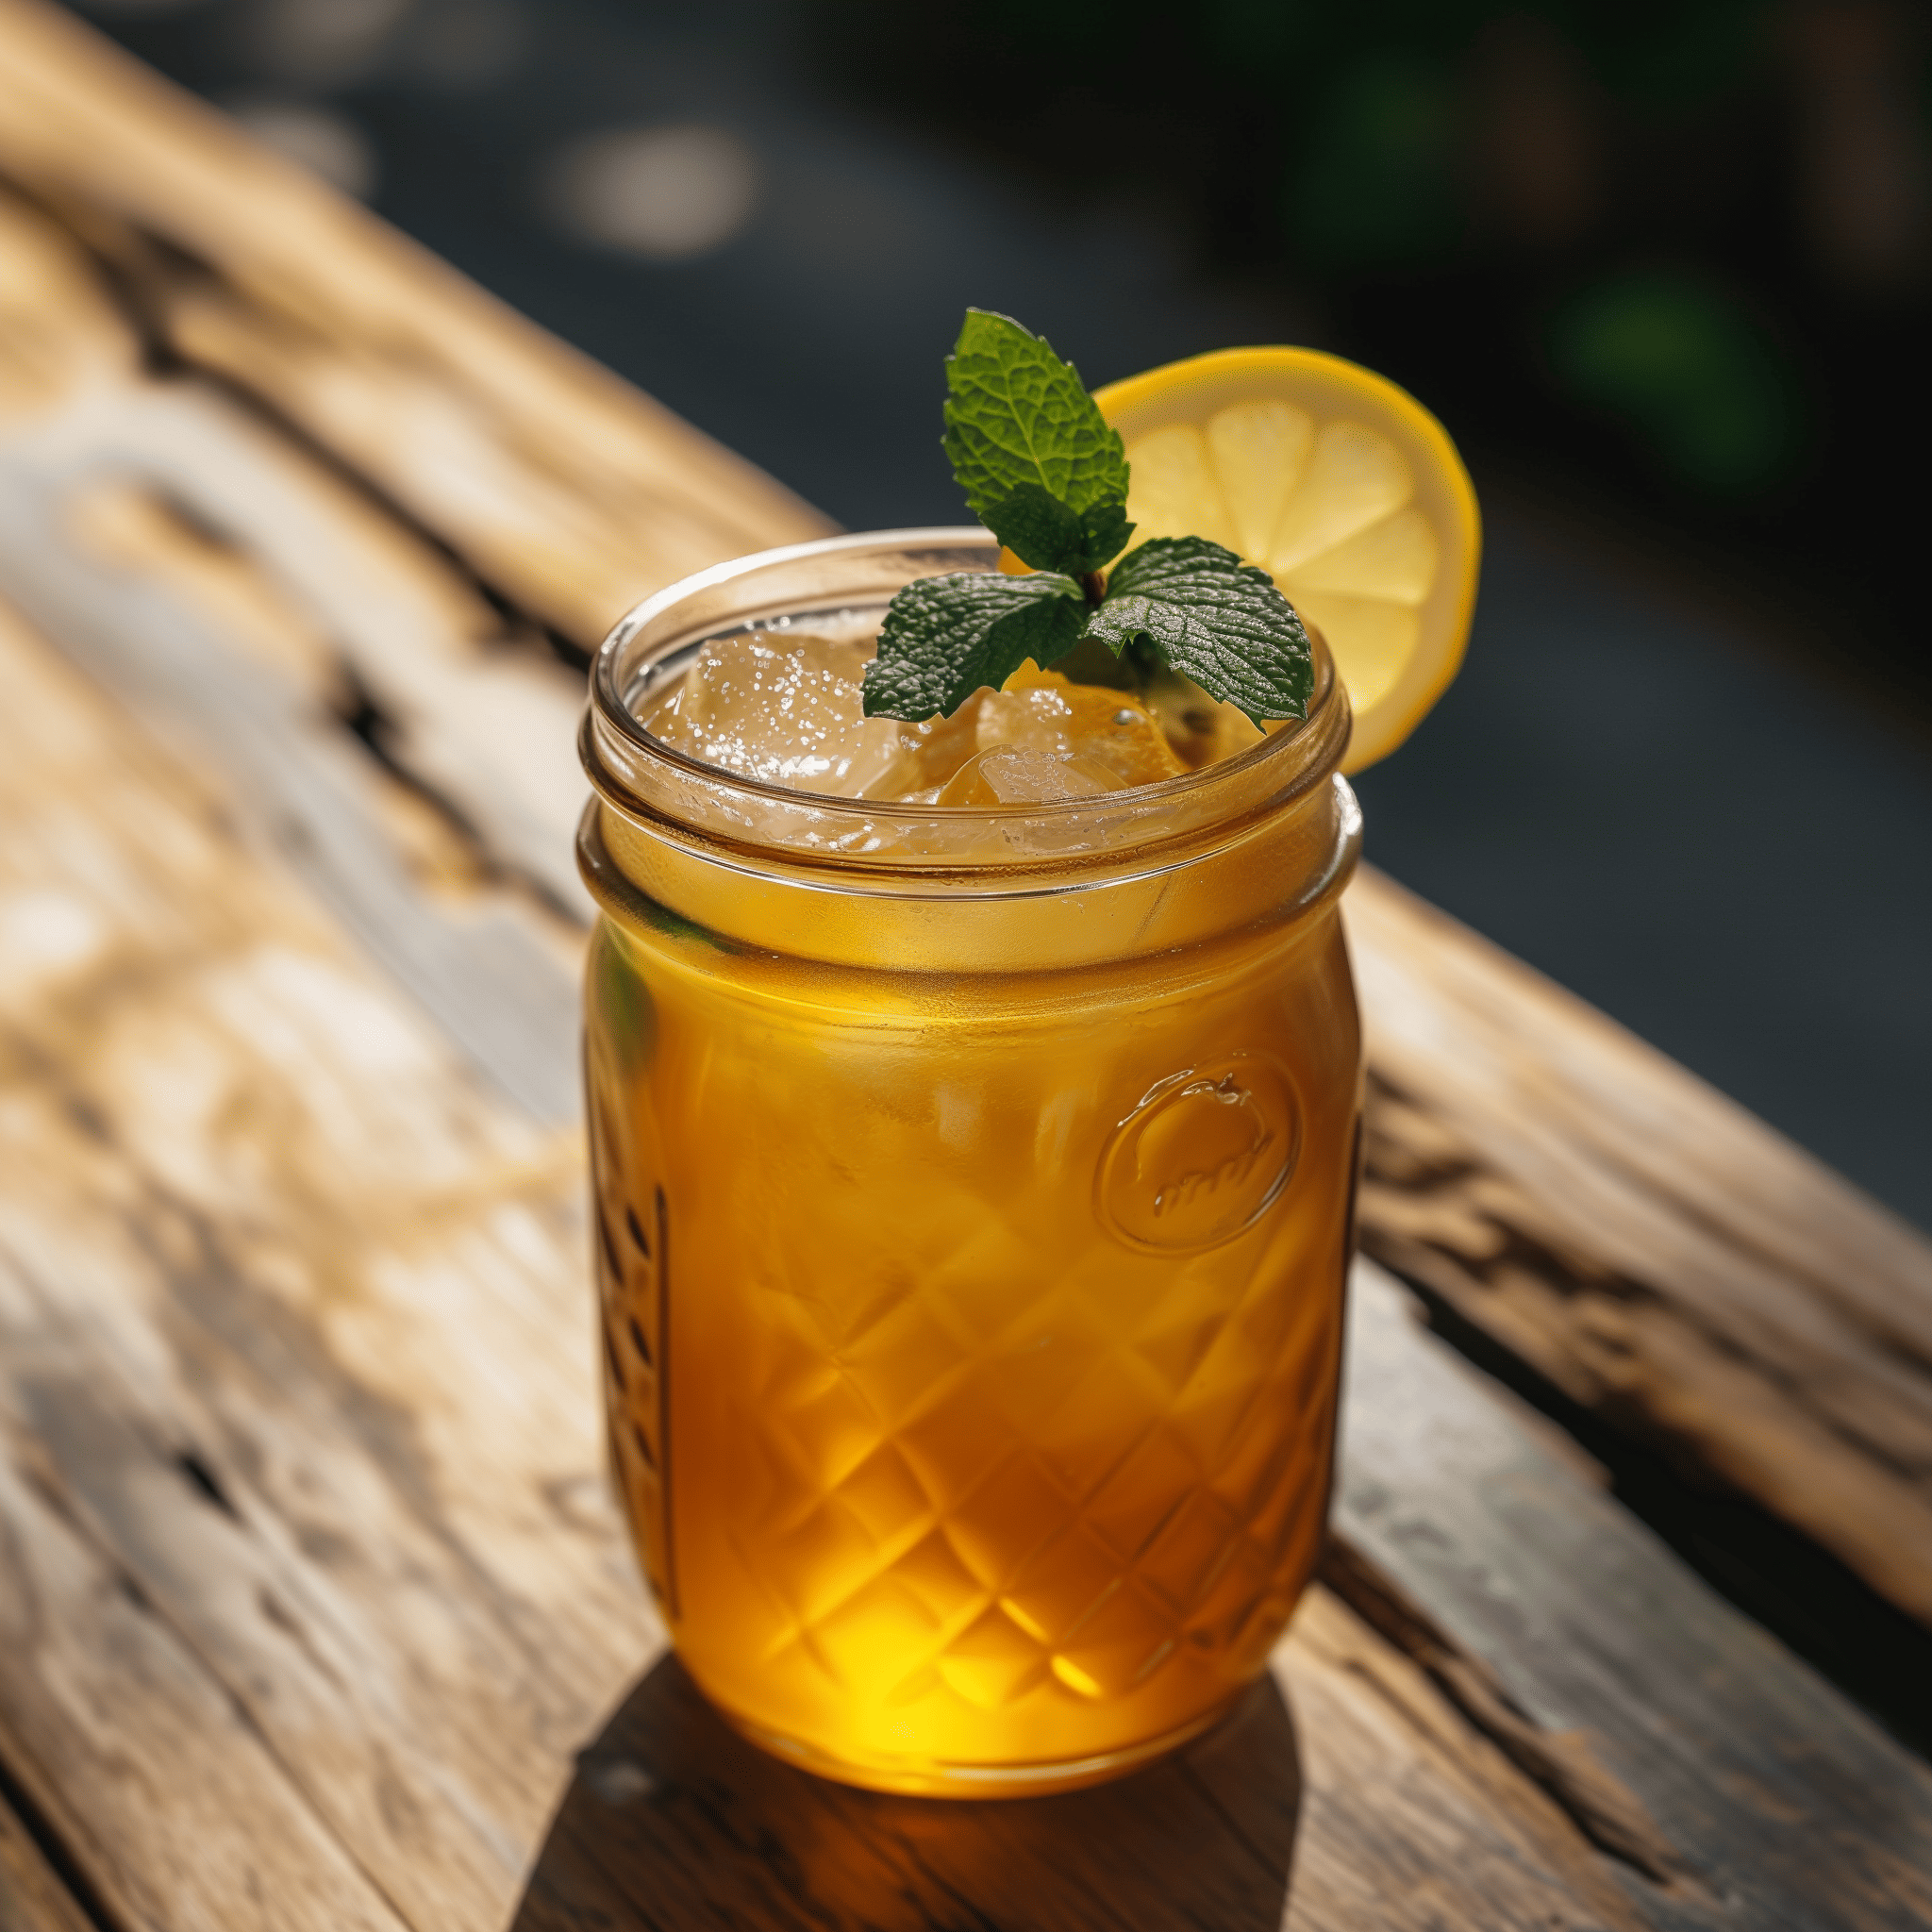 Muddy Water Cocktail Recipe - Muddy Water offers a sweet and tangy flavor profile with a refreshing citrus undertone. The tea provides a robust base, while the lemonade and orange juice concentrates add a fruity zest, making it a delightful drink for quenching your thirst.